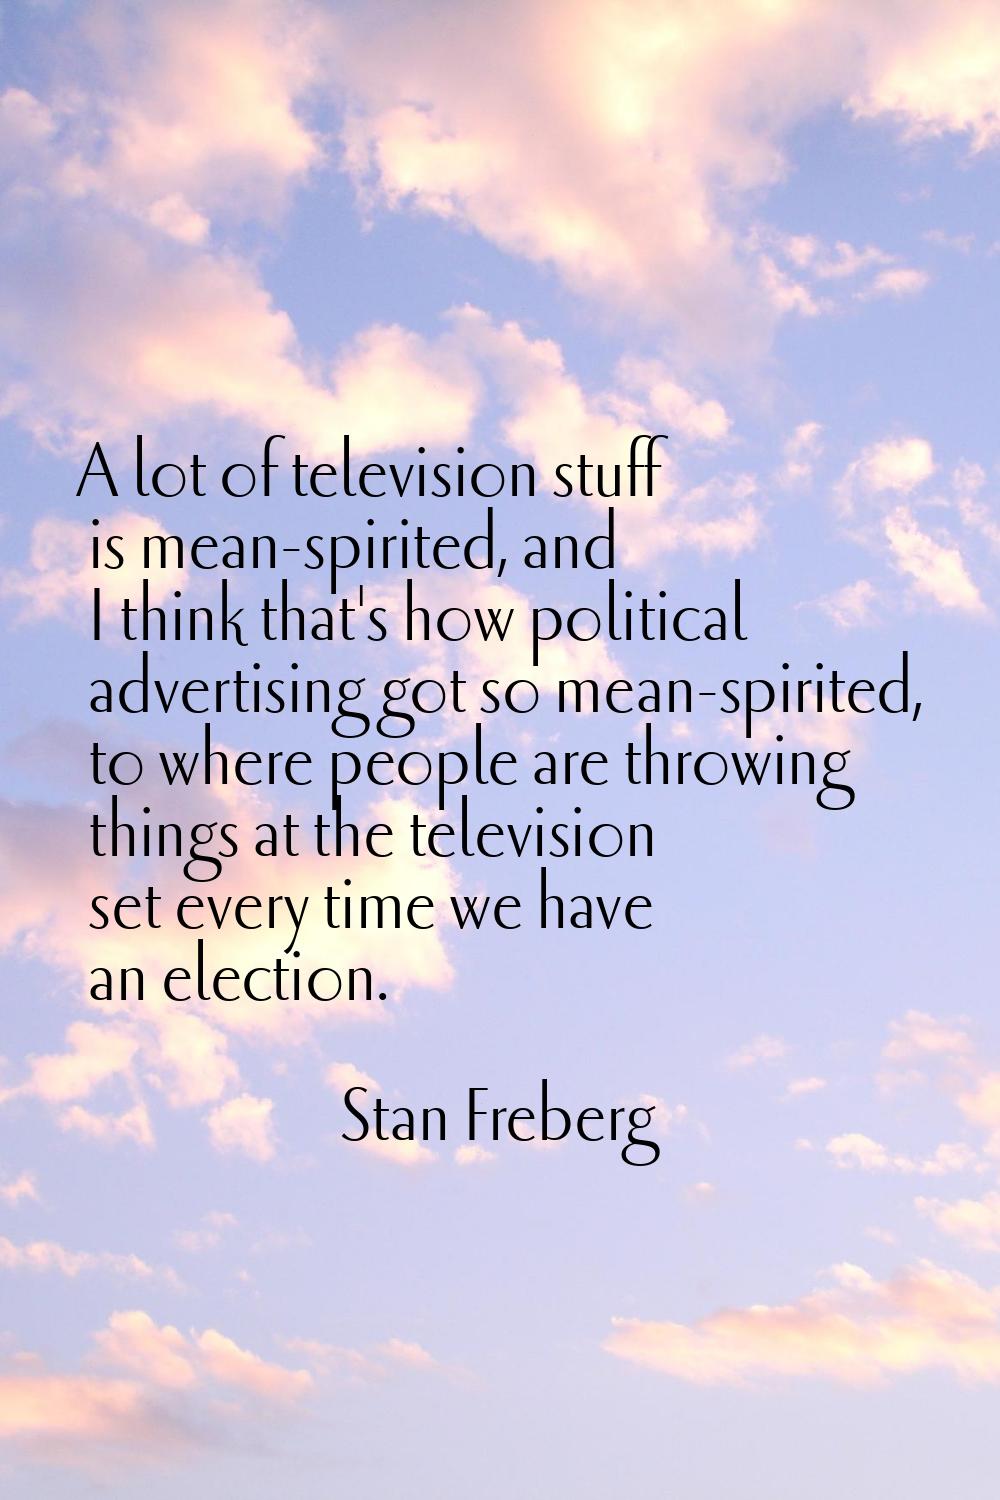 A lot of television stuff is mean-spirited, and I think that's how political advertising got so mea